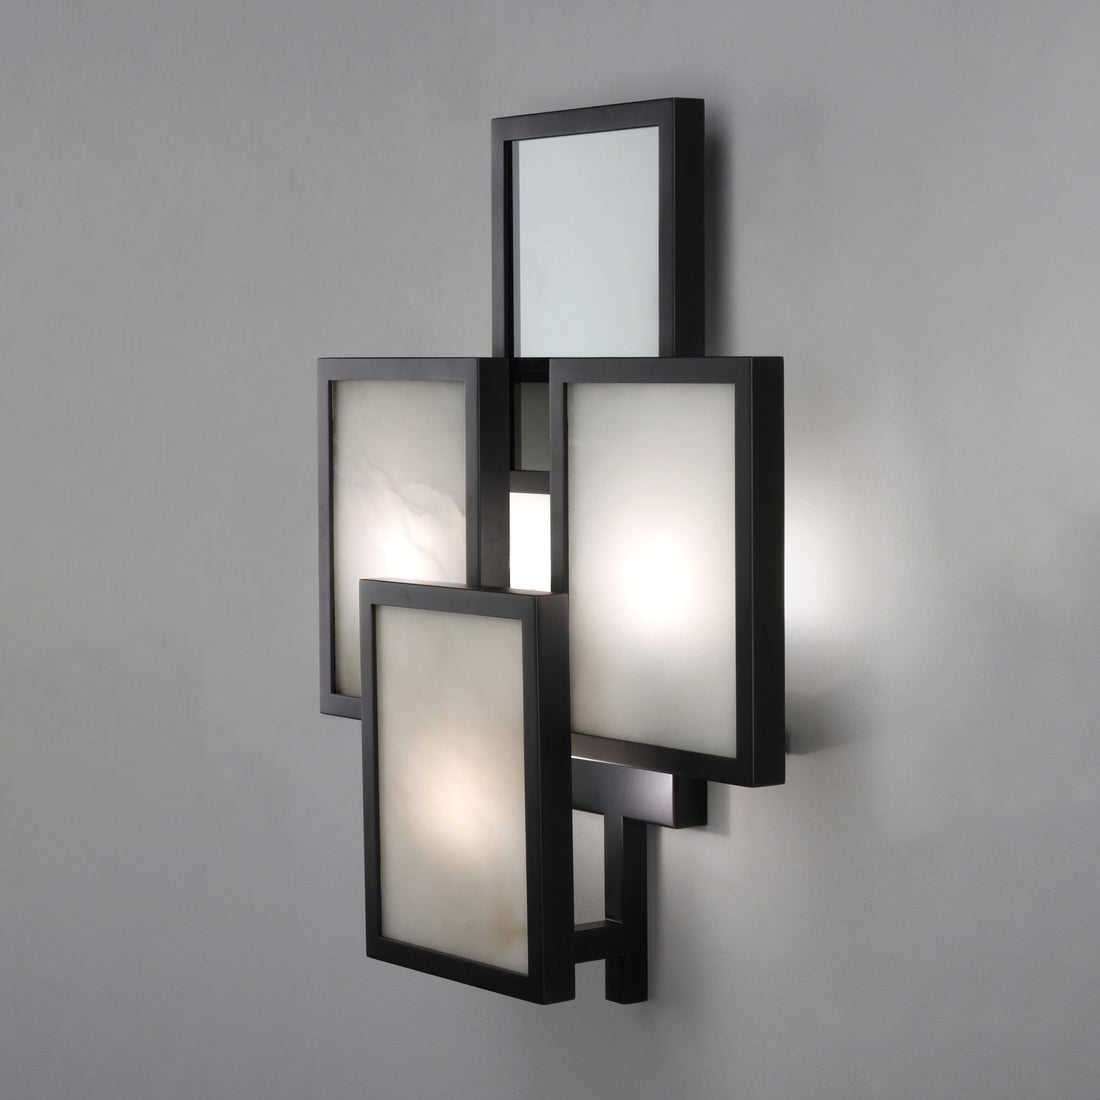 Carapace Wall Light - 4 elements